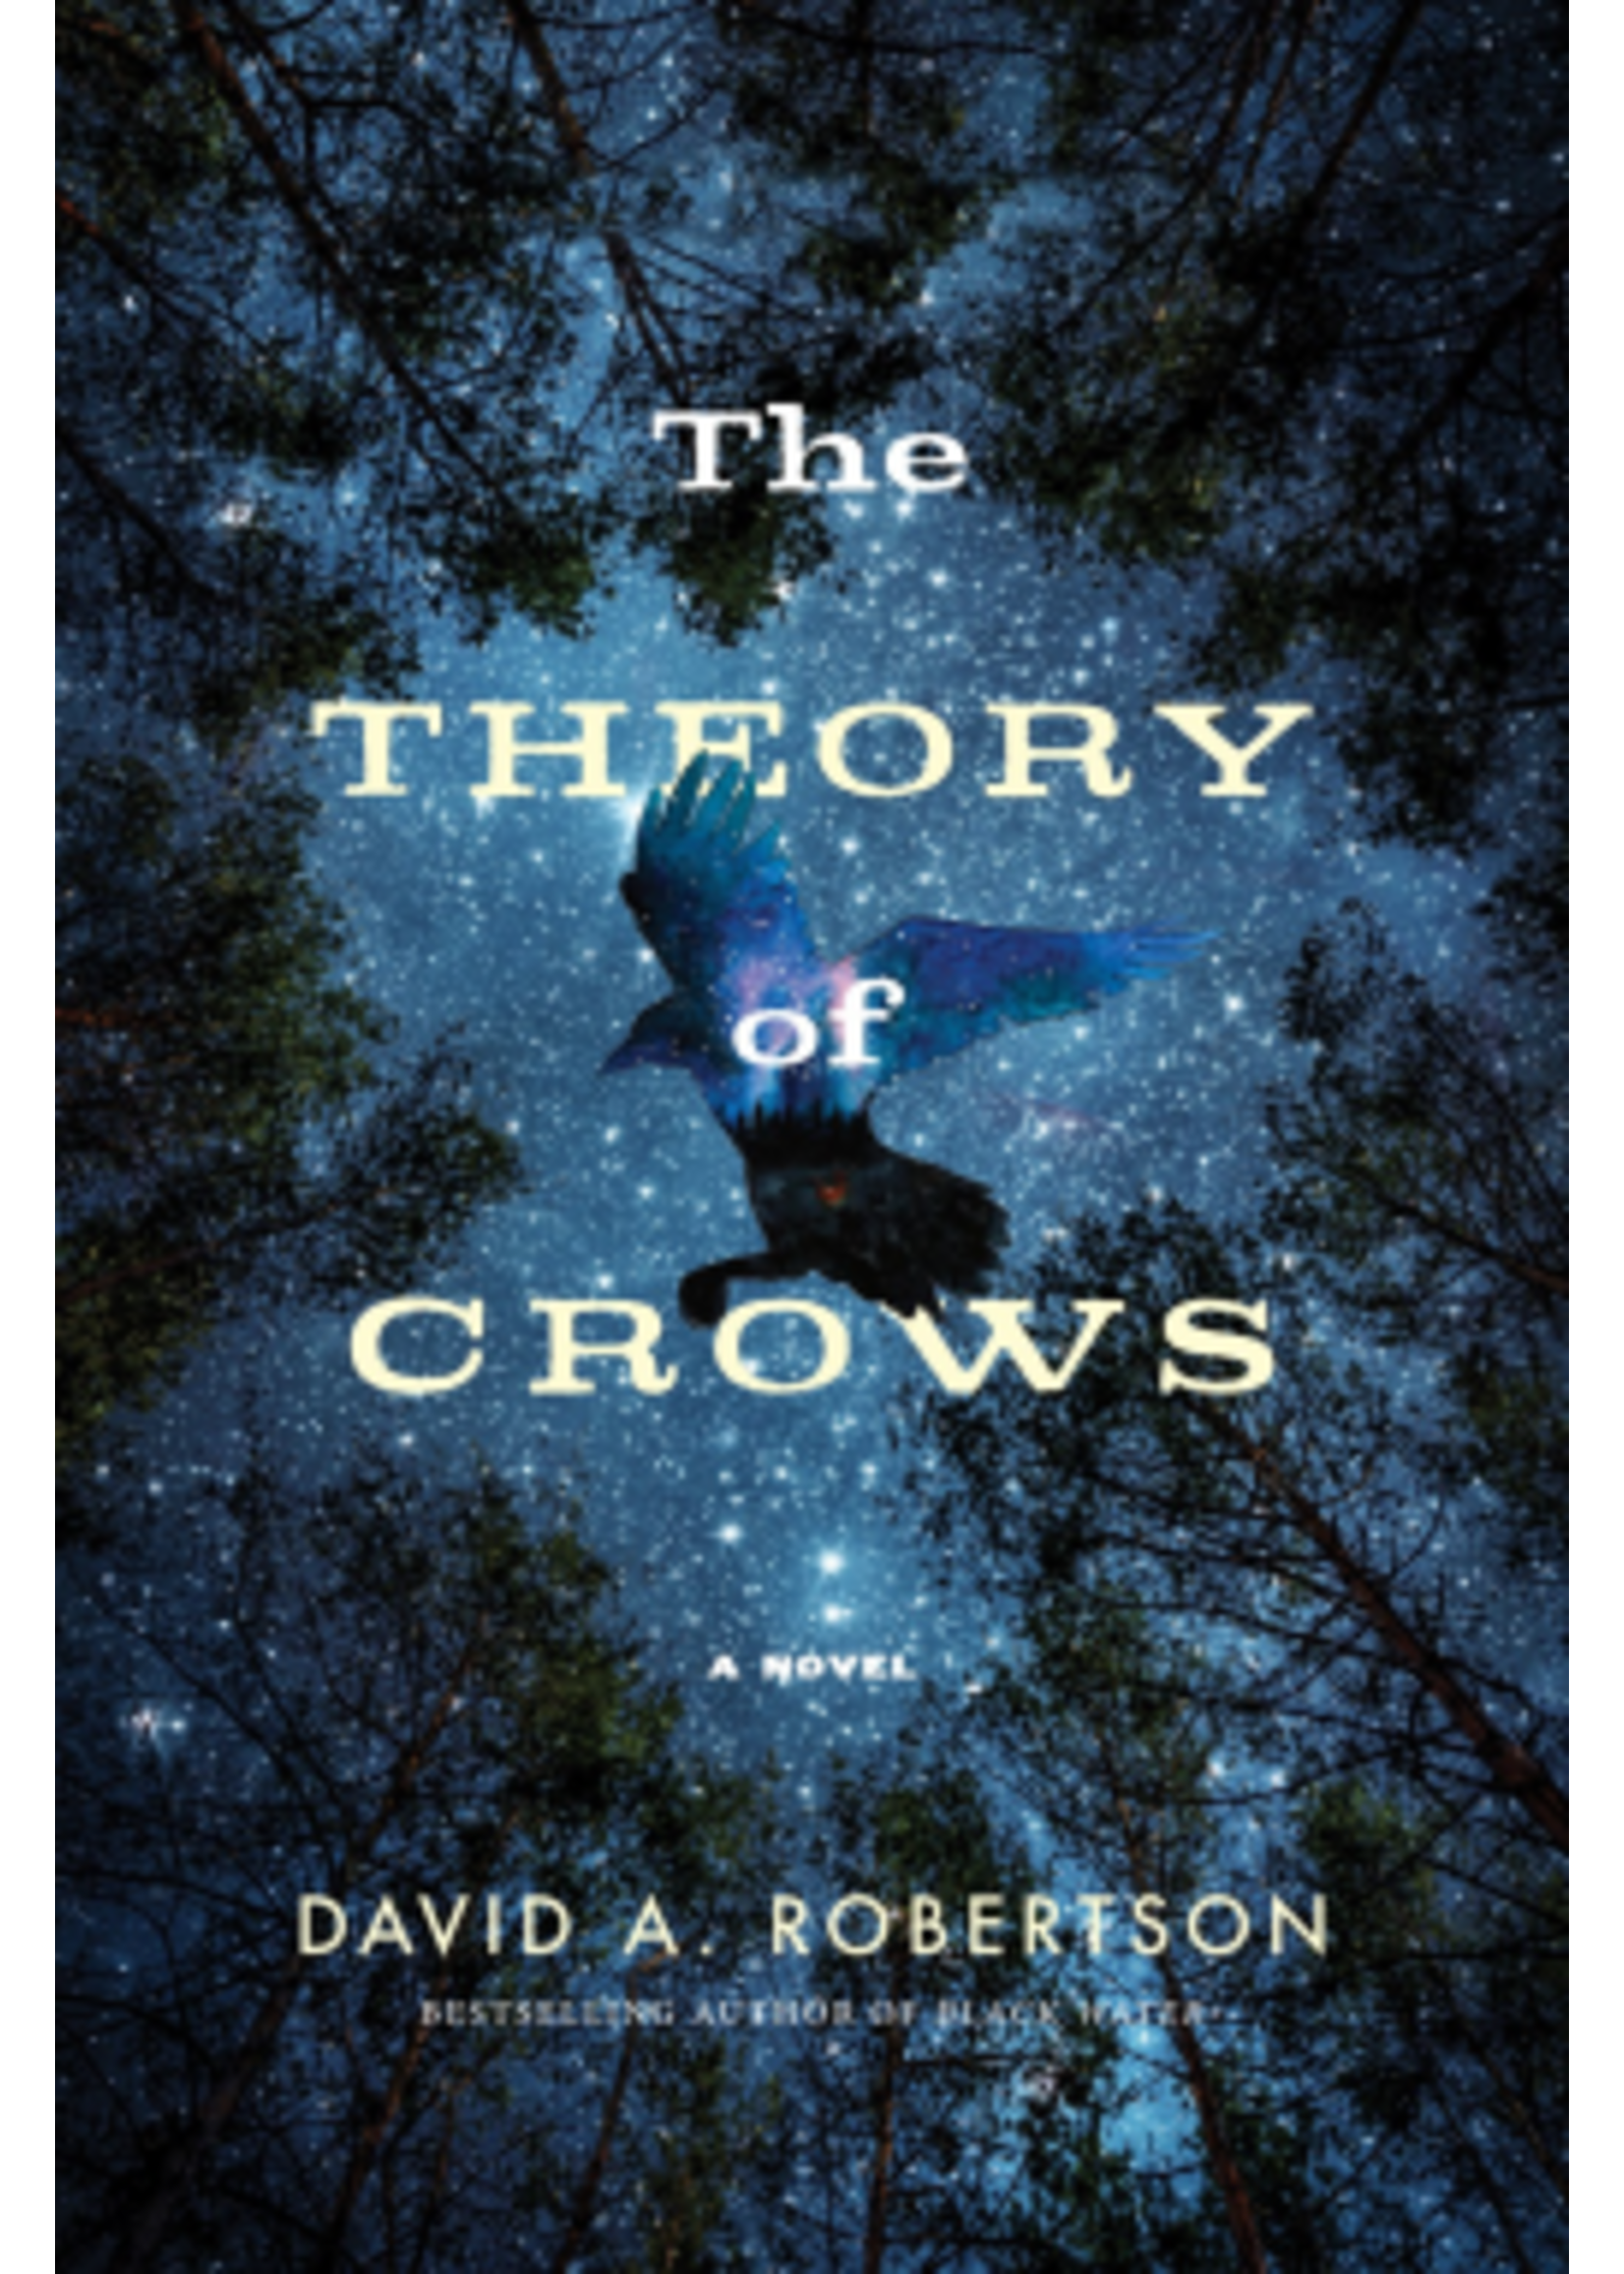 The Theory of Crows by David A. Robertson